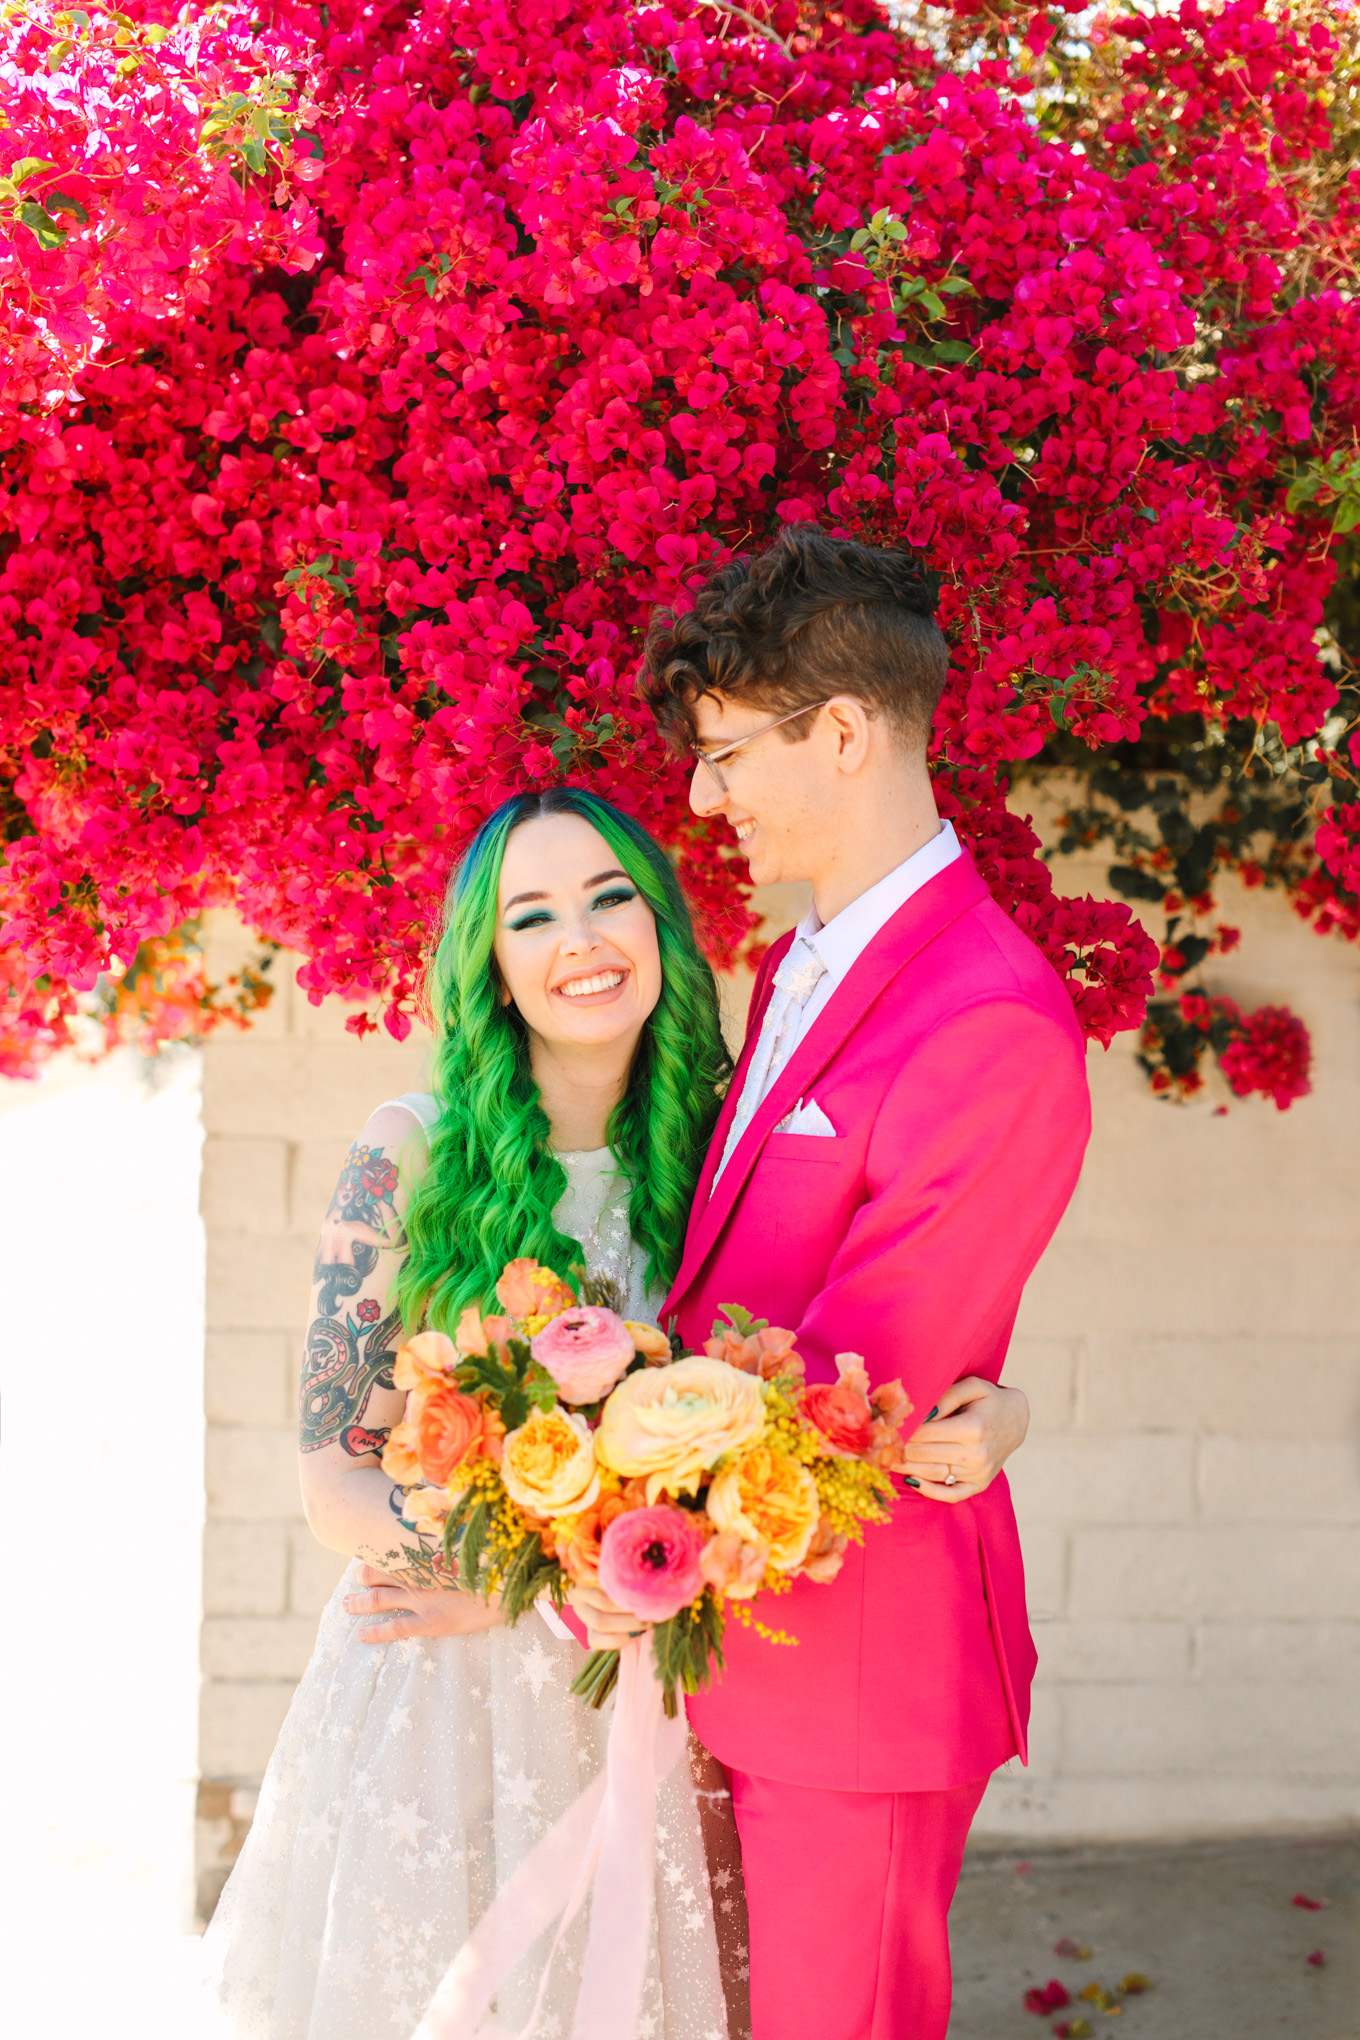 Colorful bride and groom in front of blooming bougainvillea | Colorful wedding at The Unique Space Los Angeles published in The Knot Magazine | Fresh and colorful photography for fun-loving couples in Southern California | #colorfulwedding #losangeleswedding #weddingphotography #uniquespace Source: Mary Costa Photography | Los Angeles